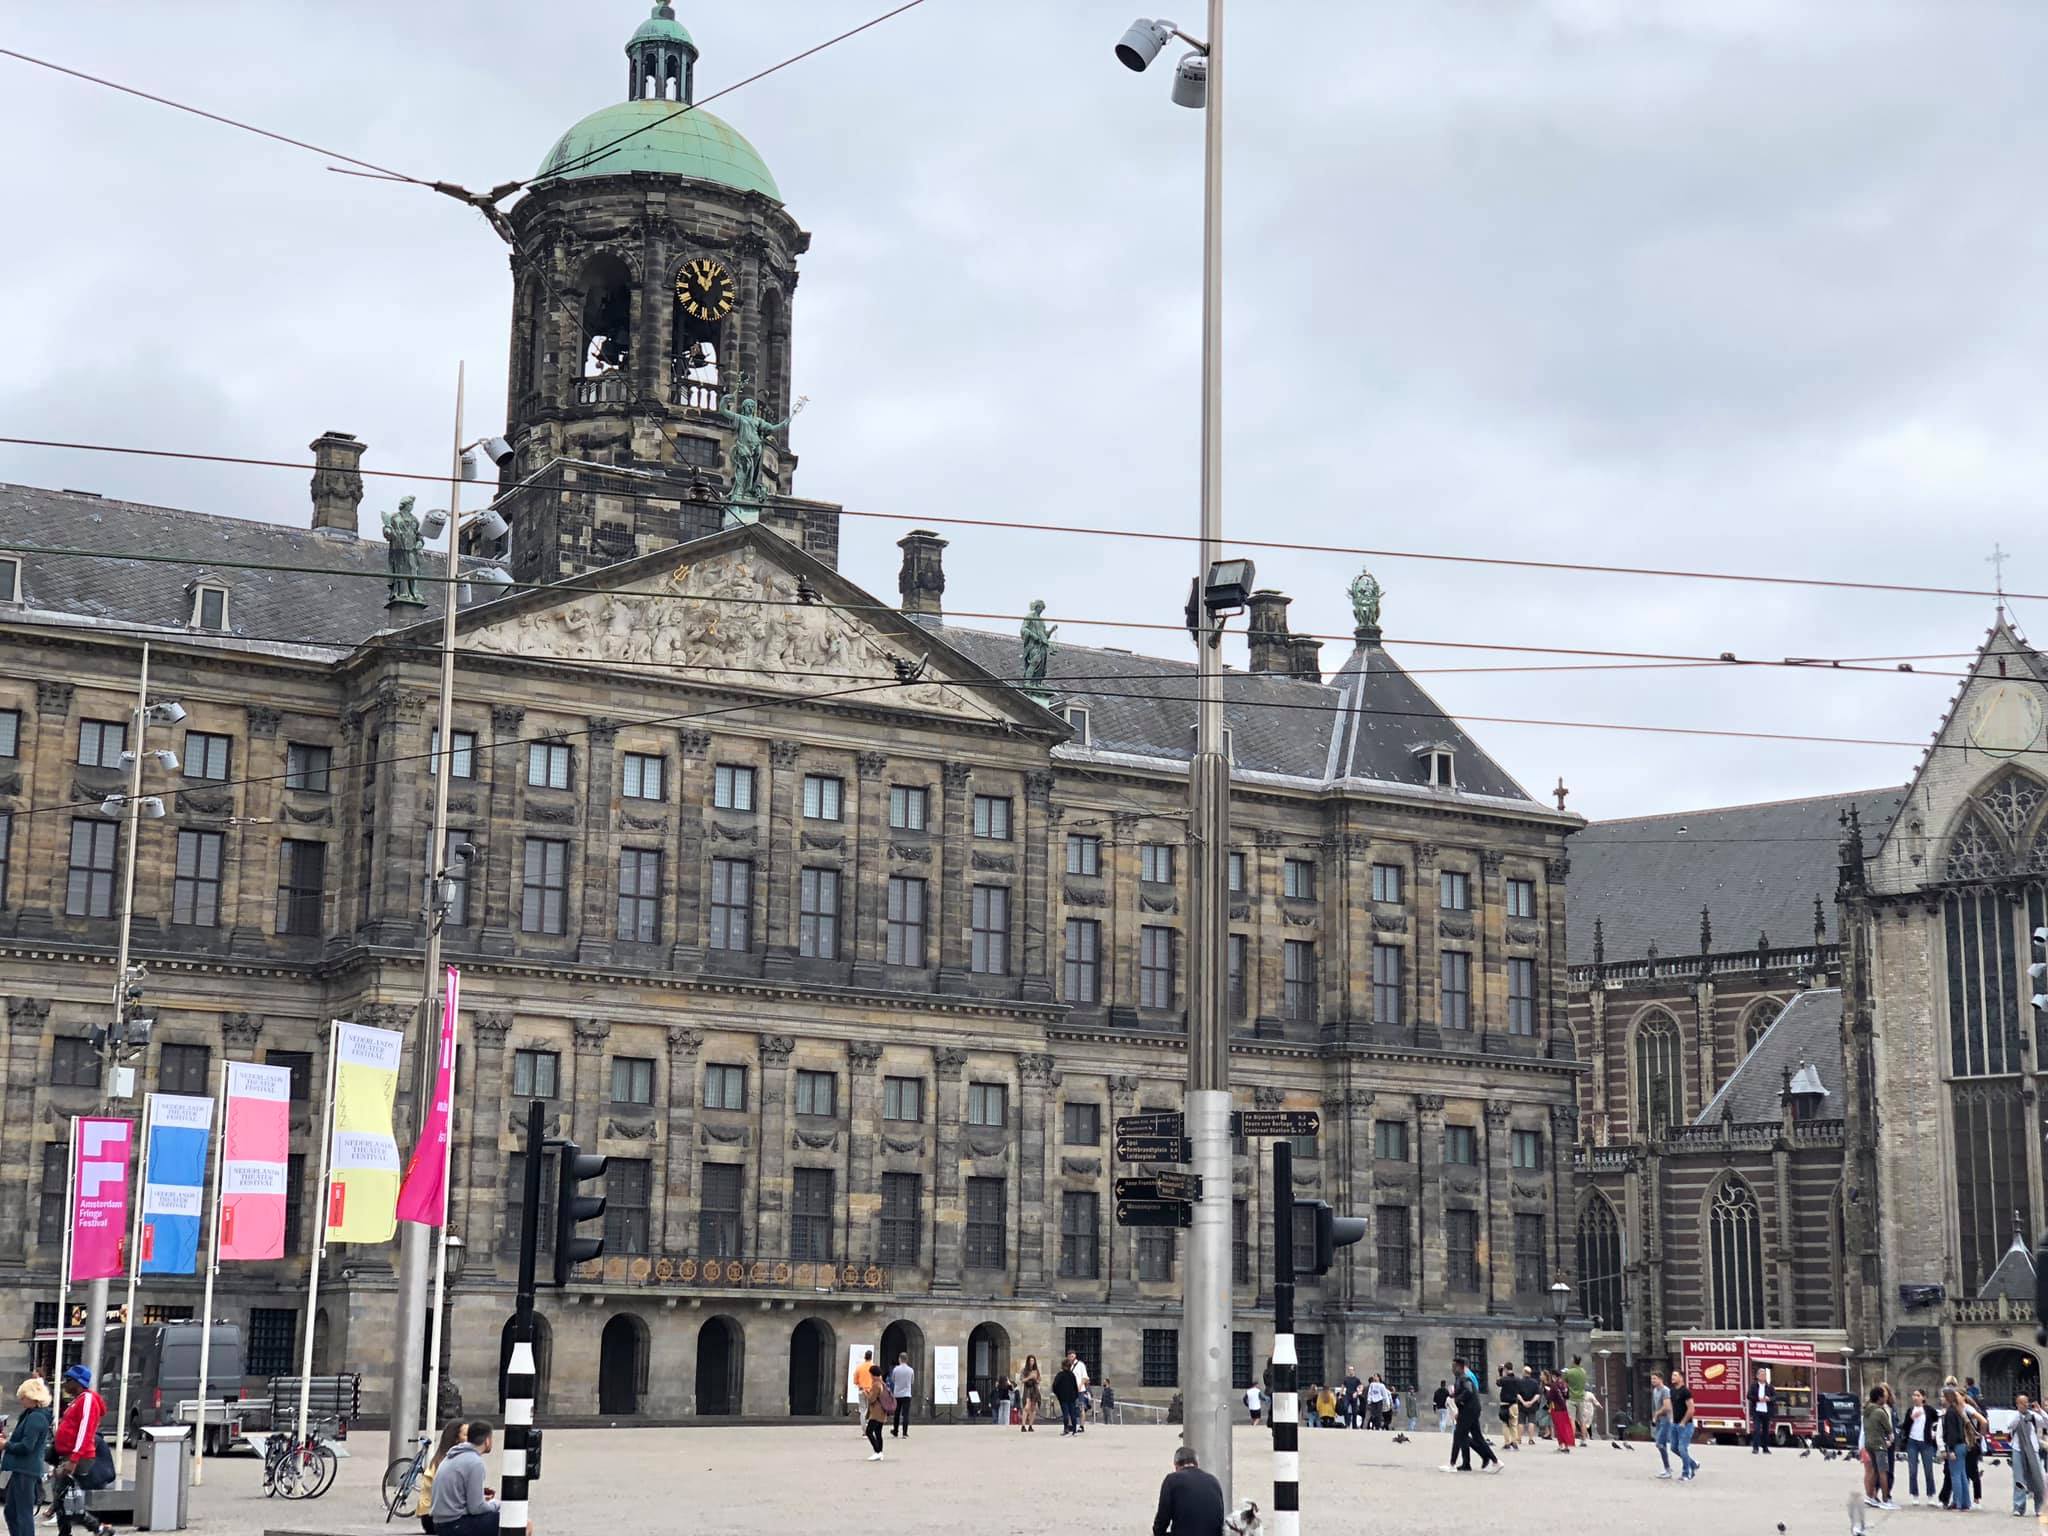 Surrounded by hundreds and hundreds of years of history 🇳🇱❤️